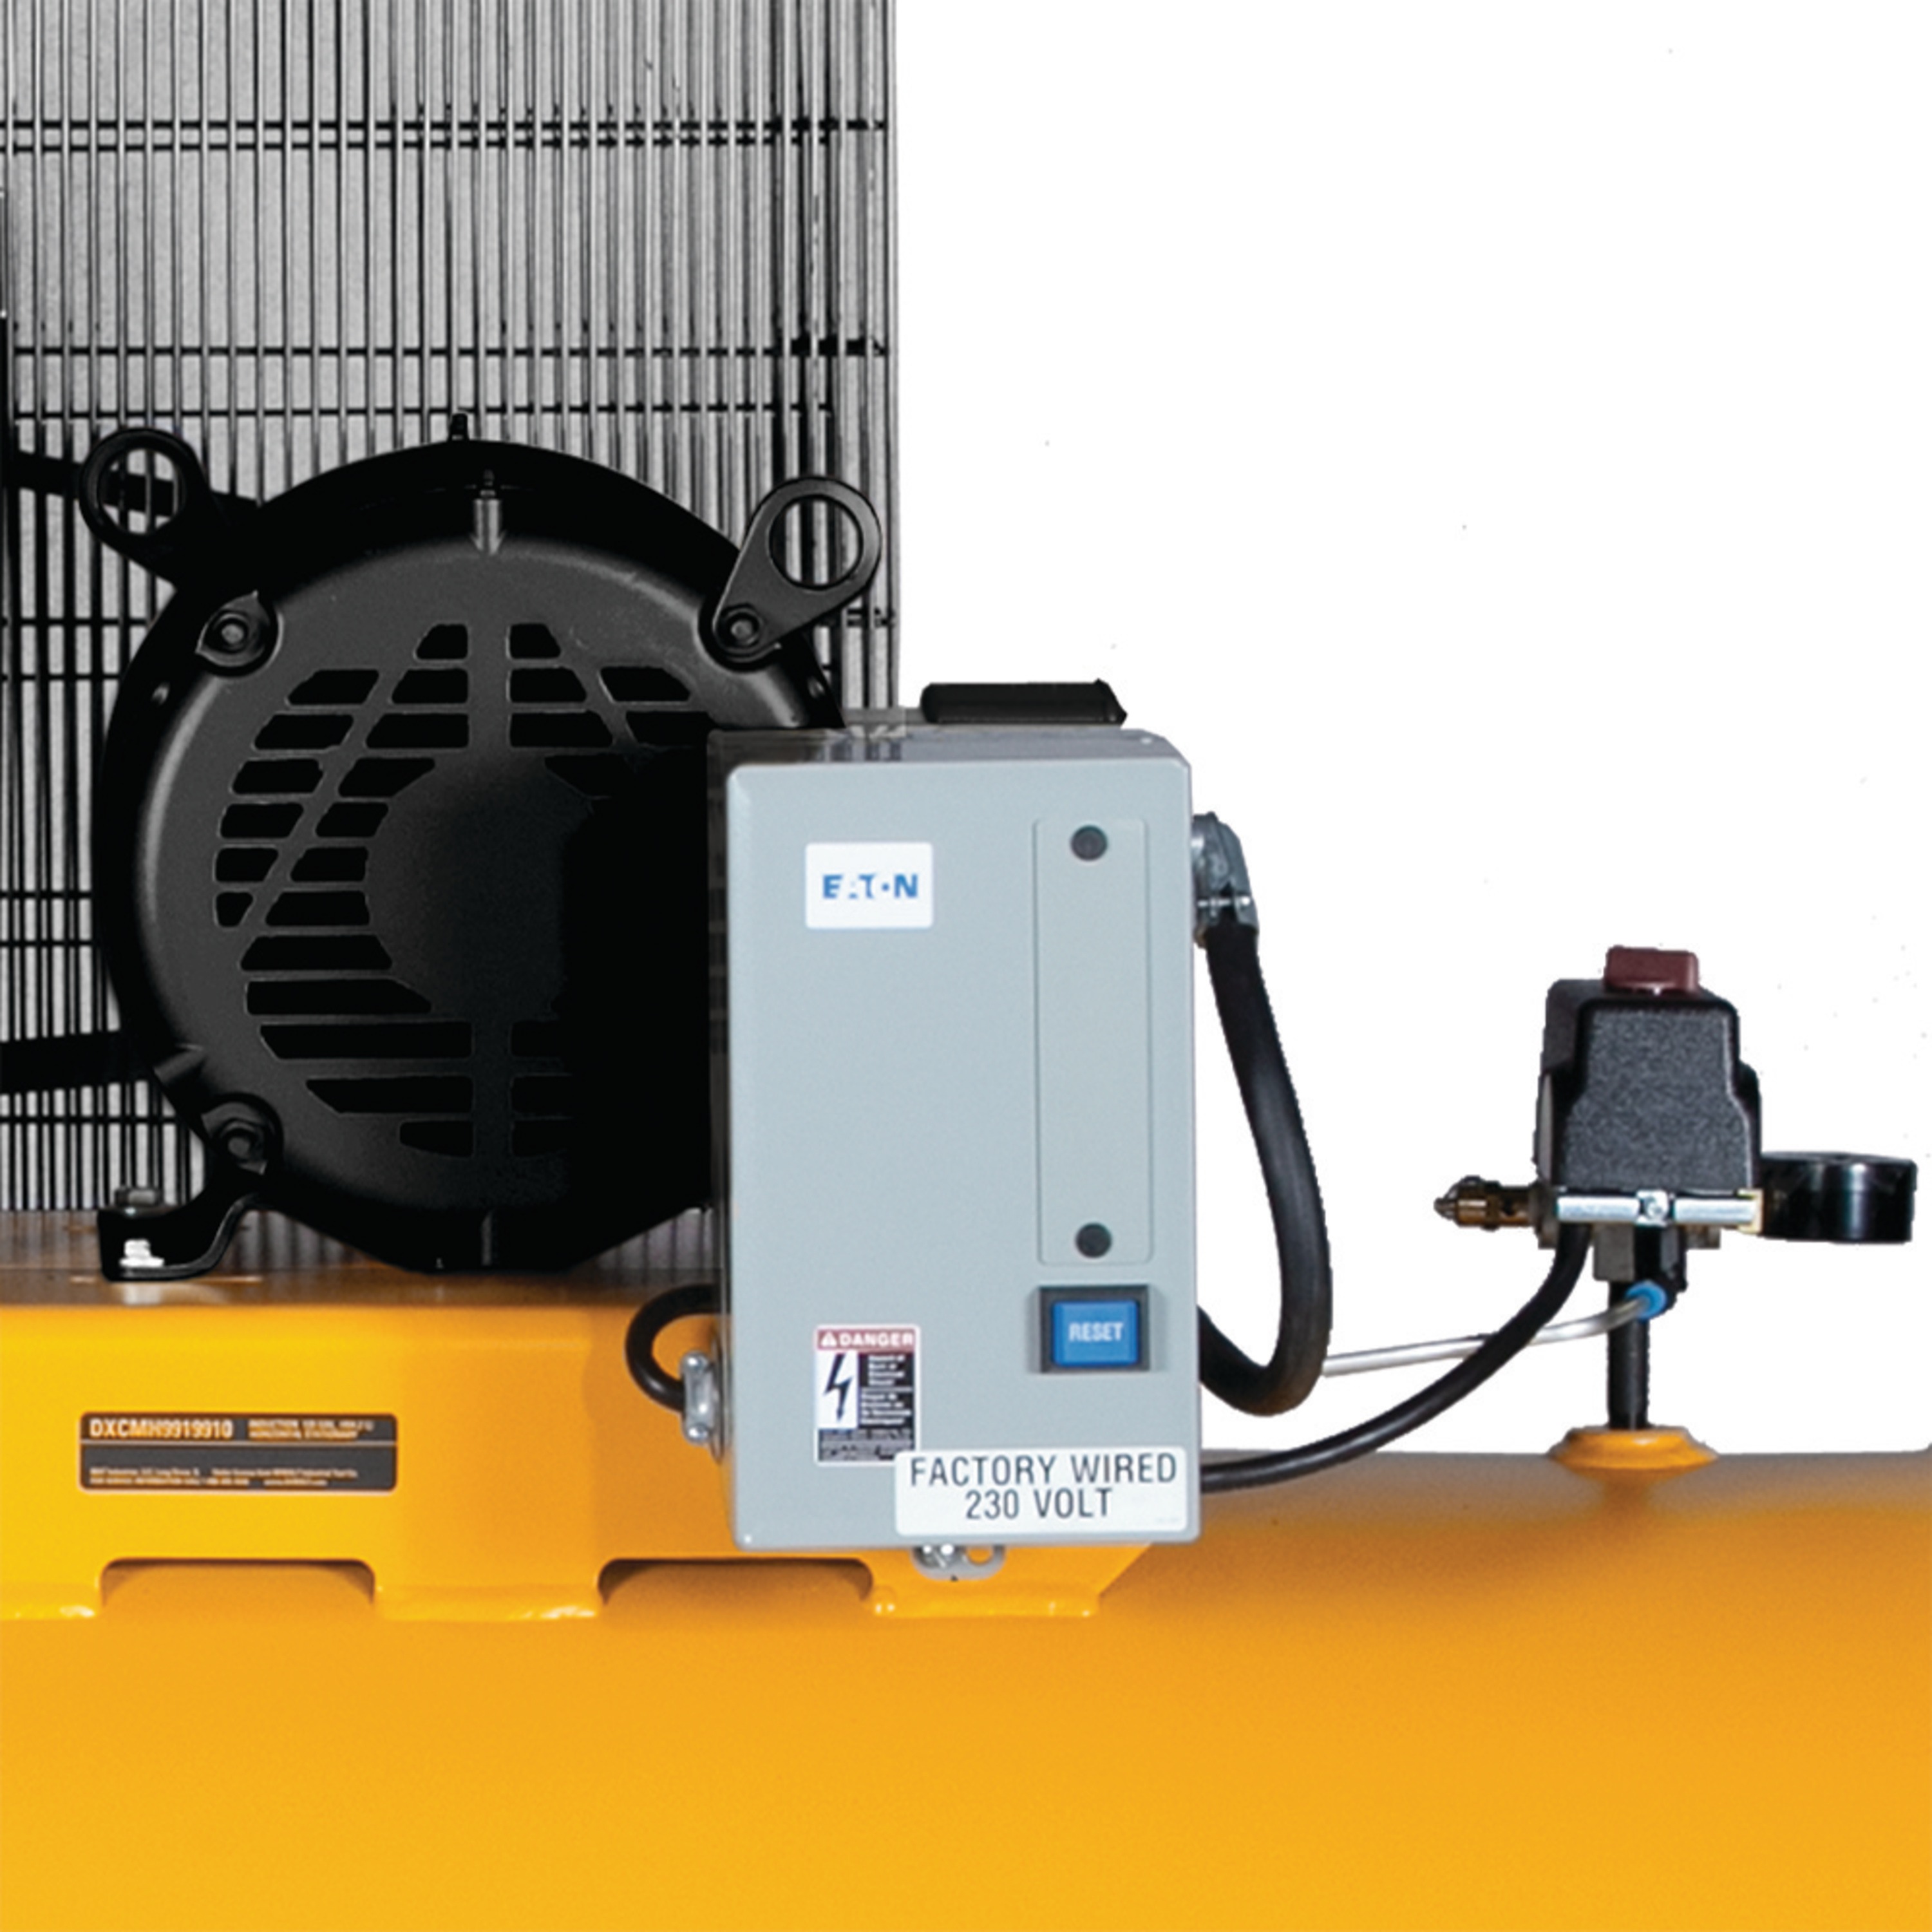 Star delta starter feature of 120 gallon 2 stage electric air compressor.
